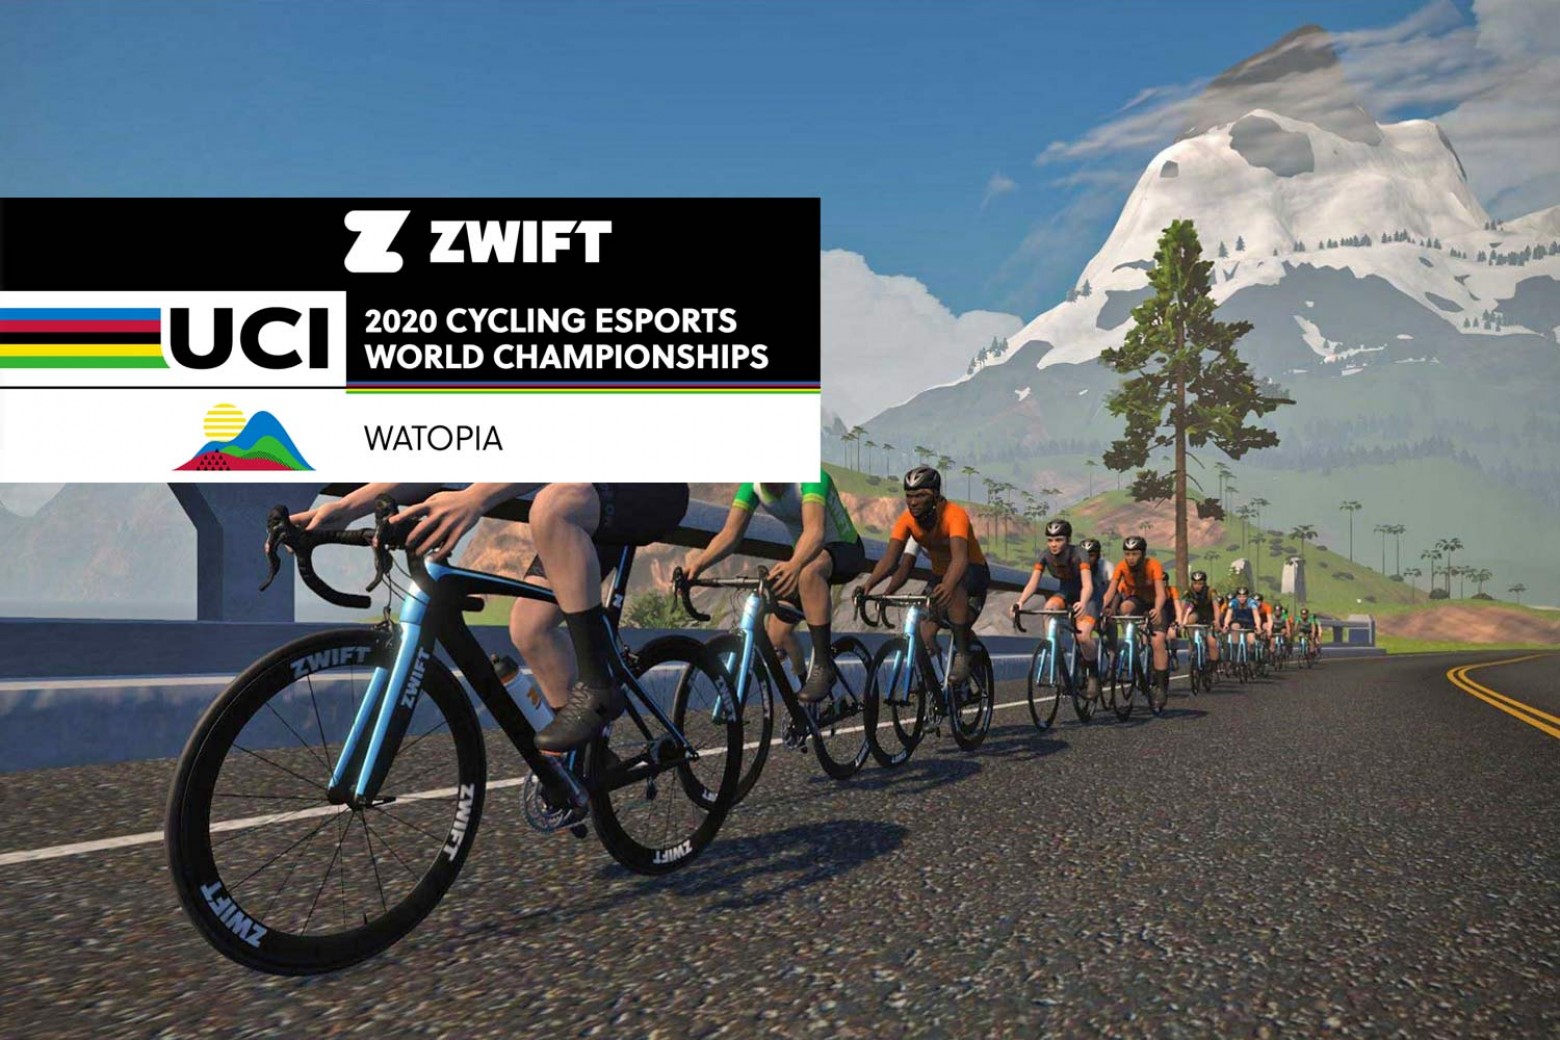 The UCI 2020 Cycling eSports World Championship will be this December in  Watopia